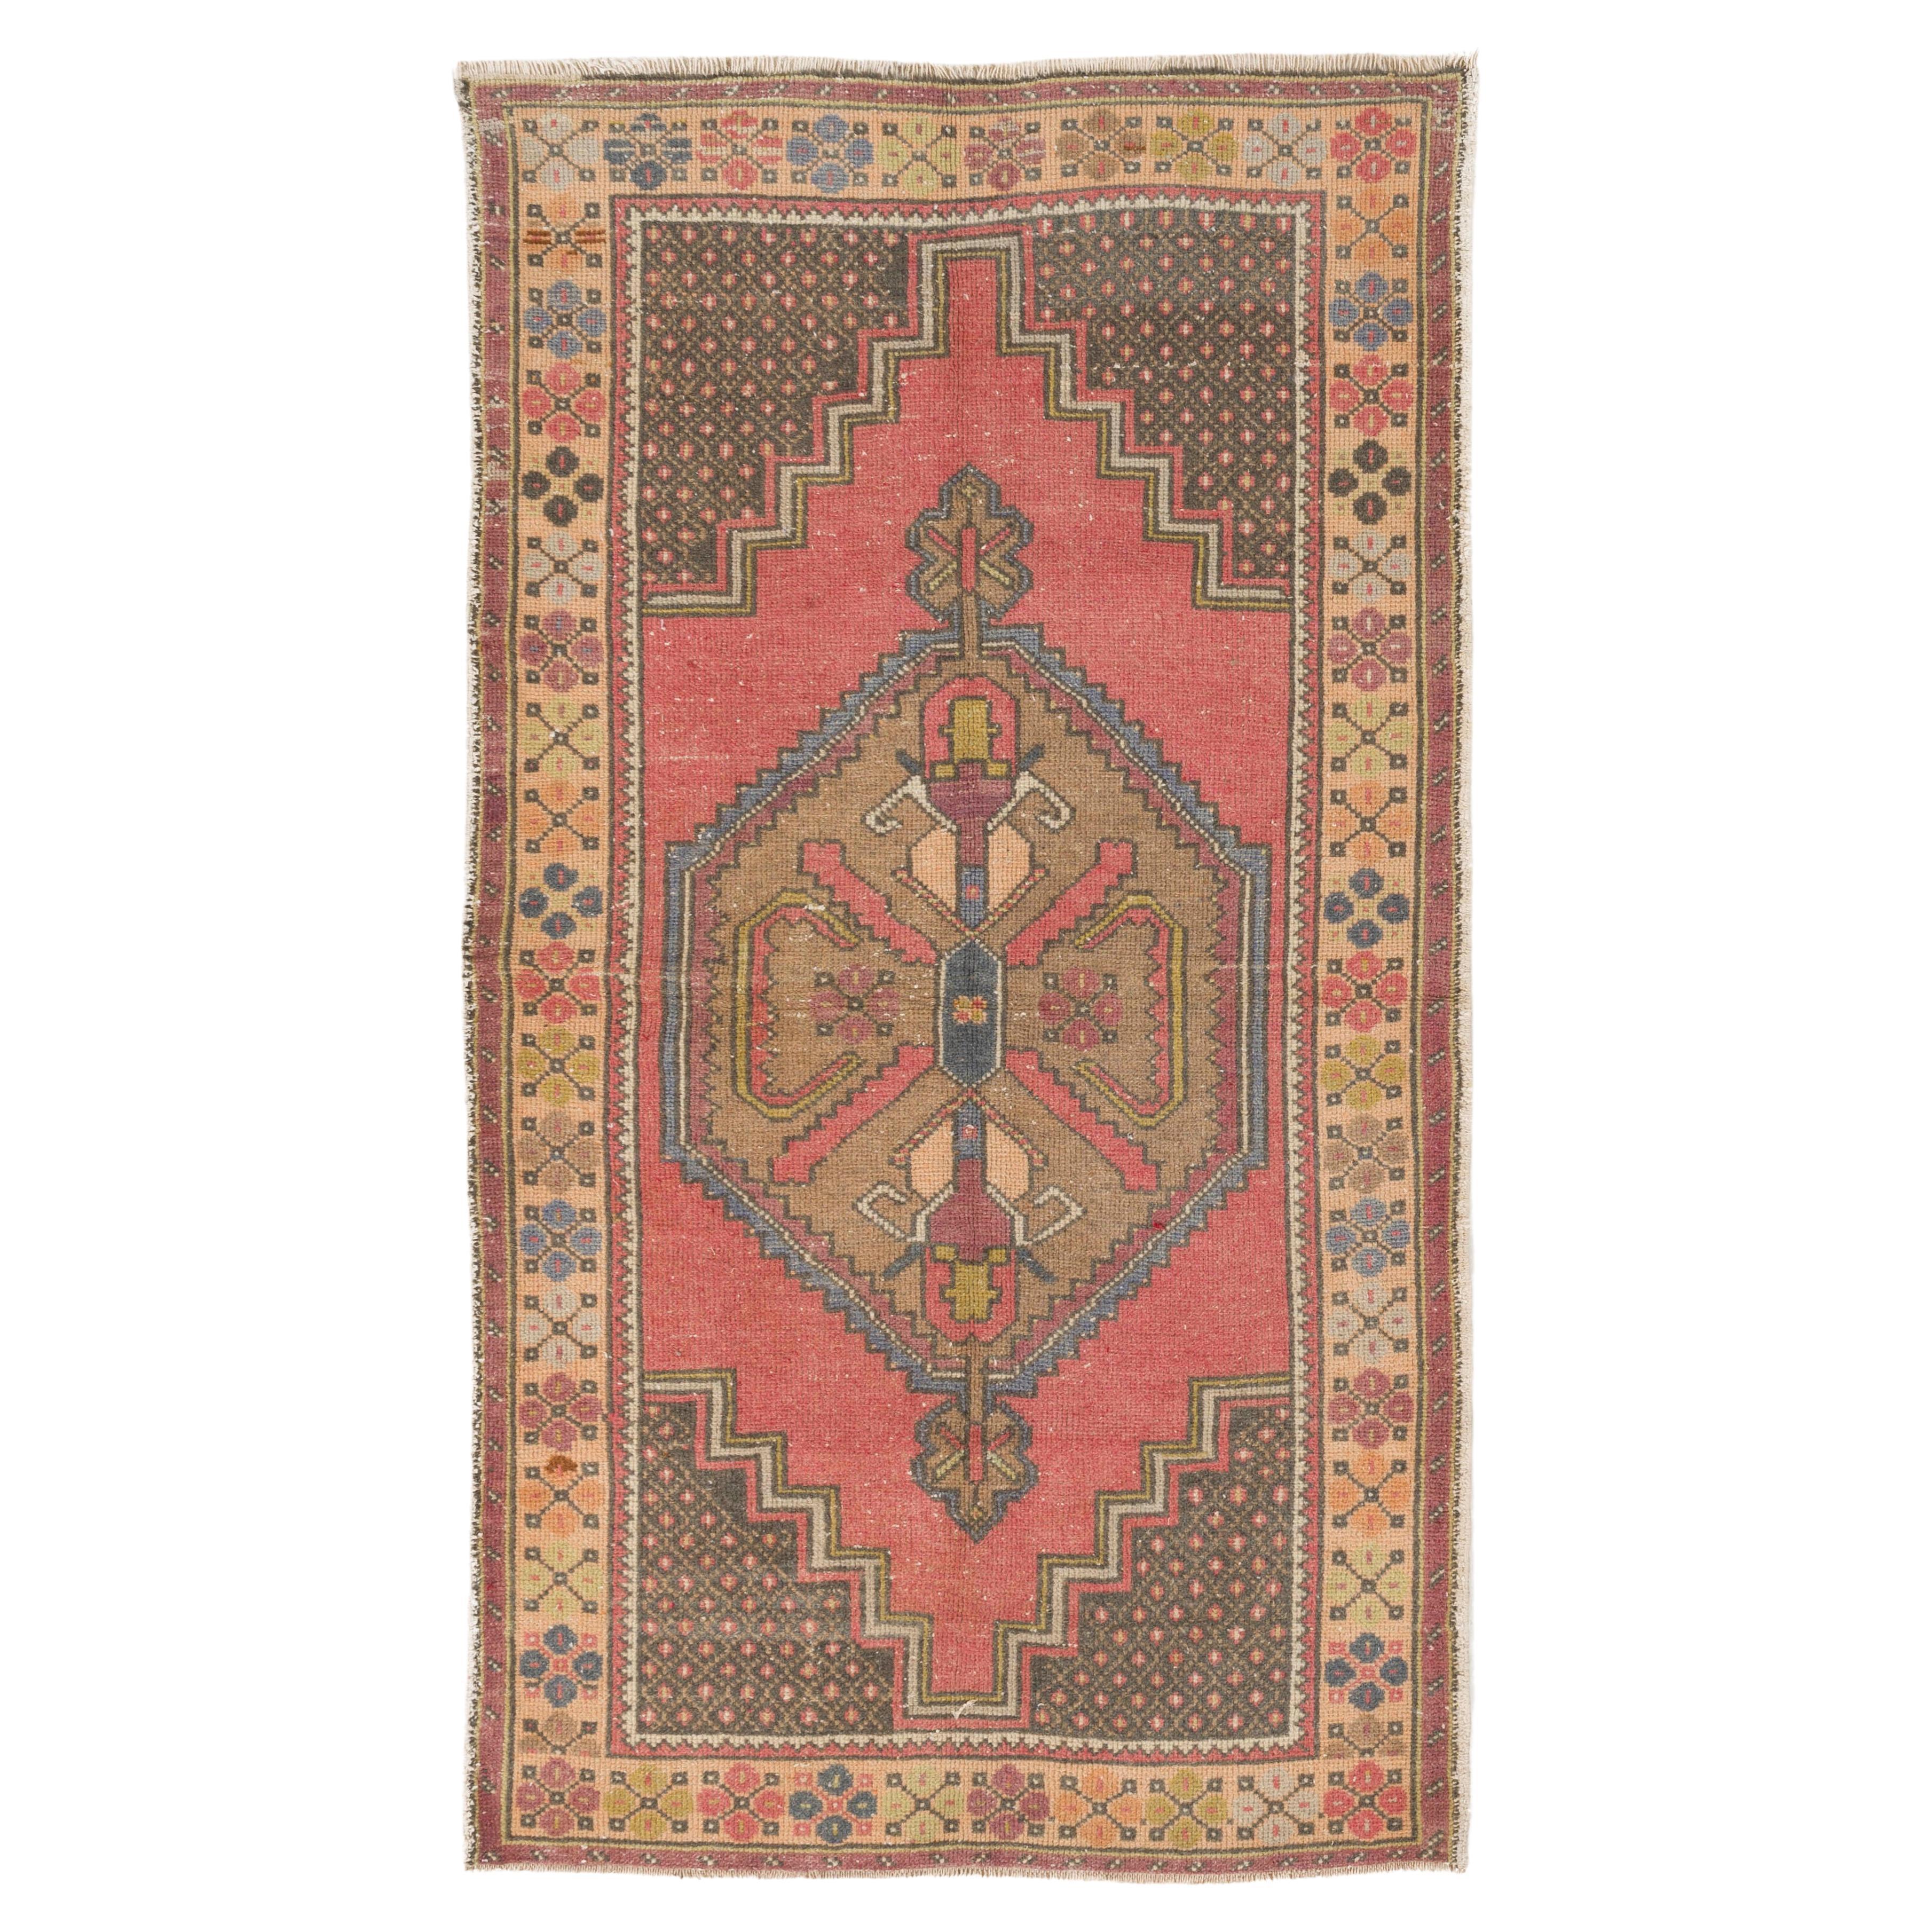 3.8x6.7 Ft Vintage Handmade Turkish Accent Rug, Authentic 1950s Floor Covering For Sale